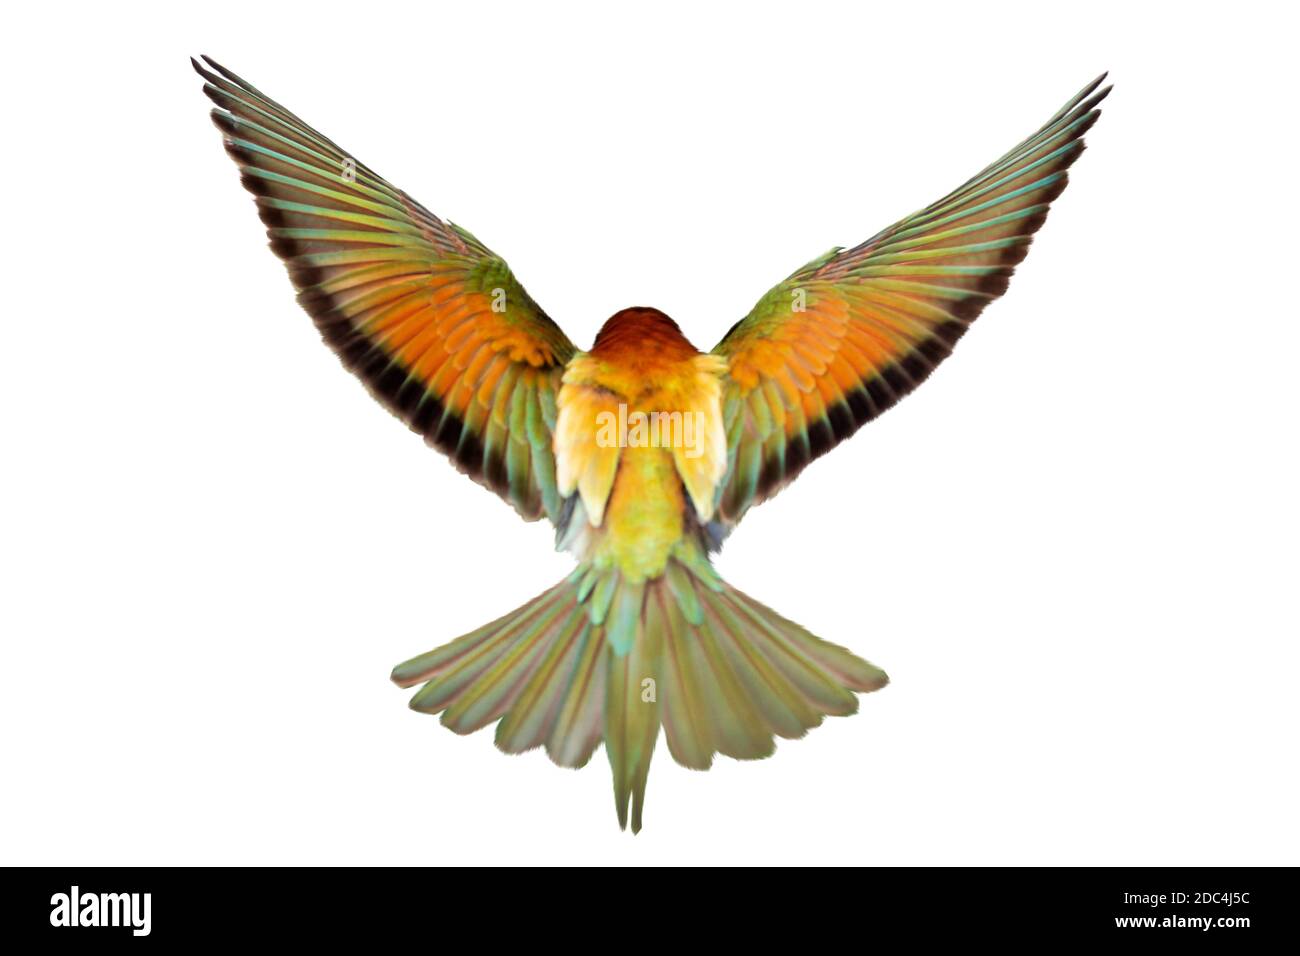 colorful bird flies wings spread on white background Stock Photo